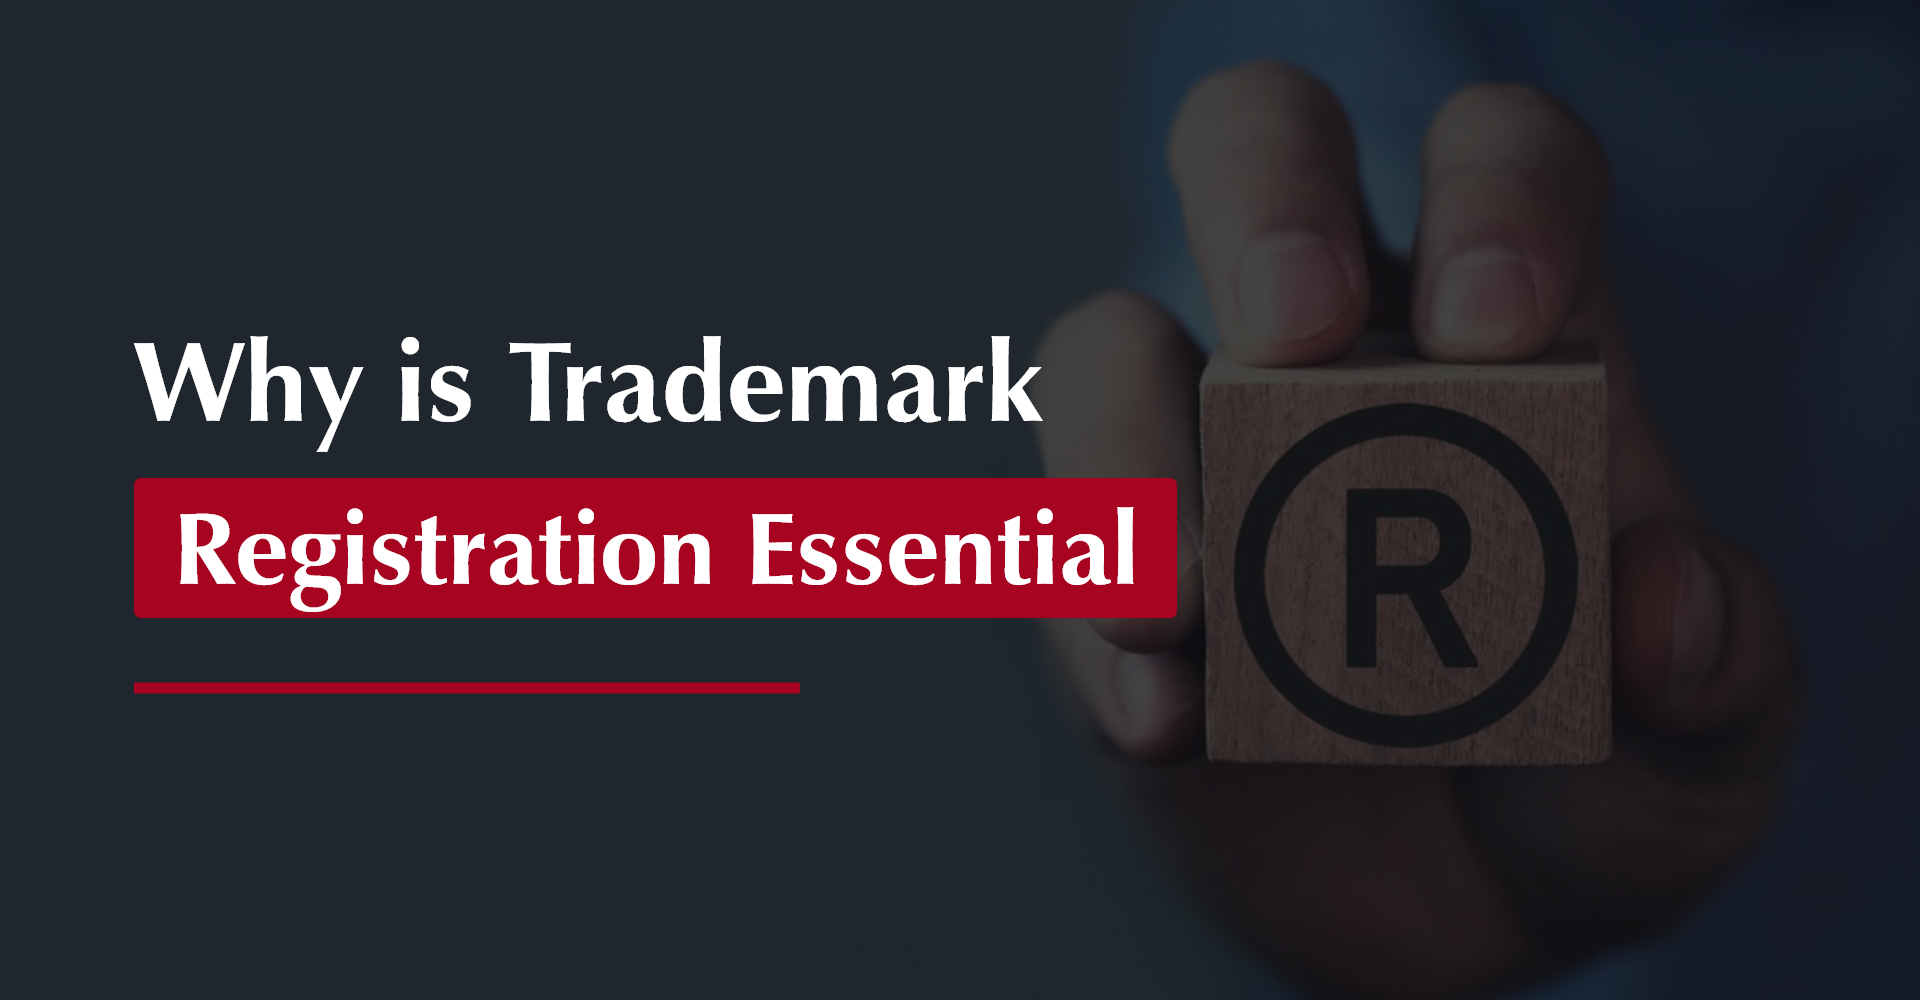 Why is trademark registration essential?